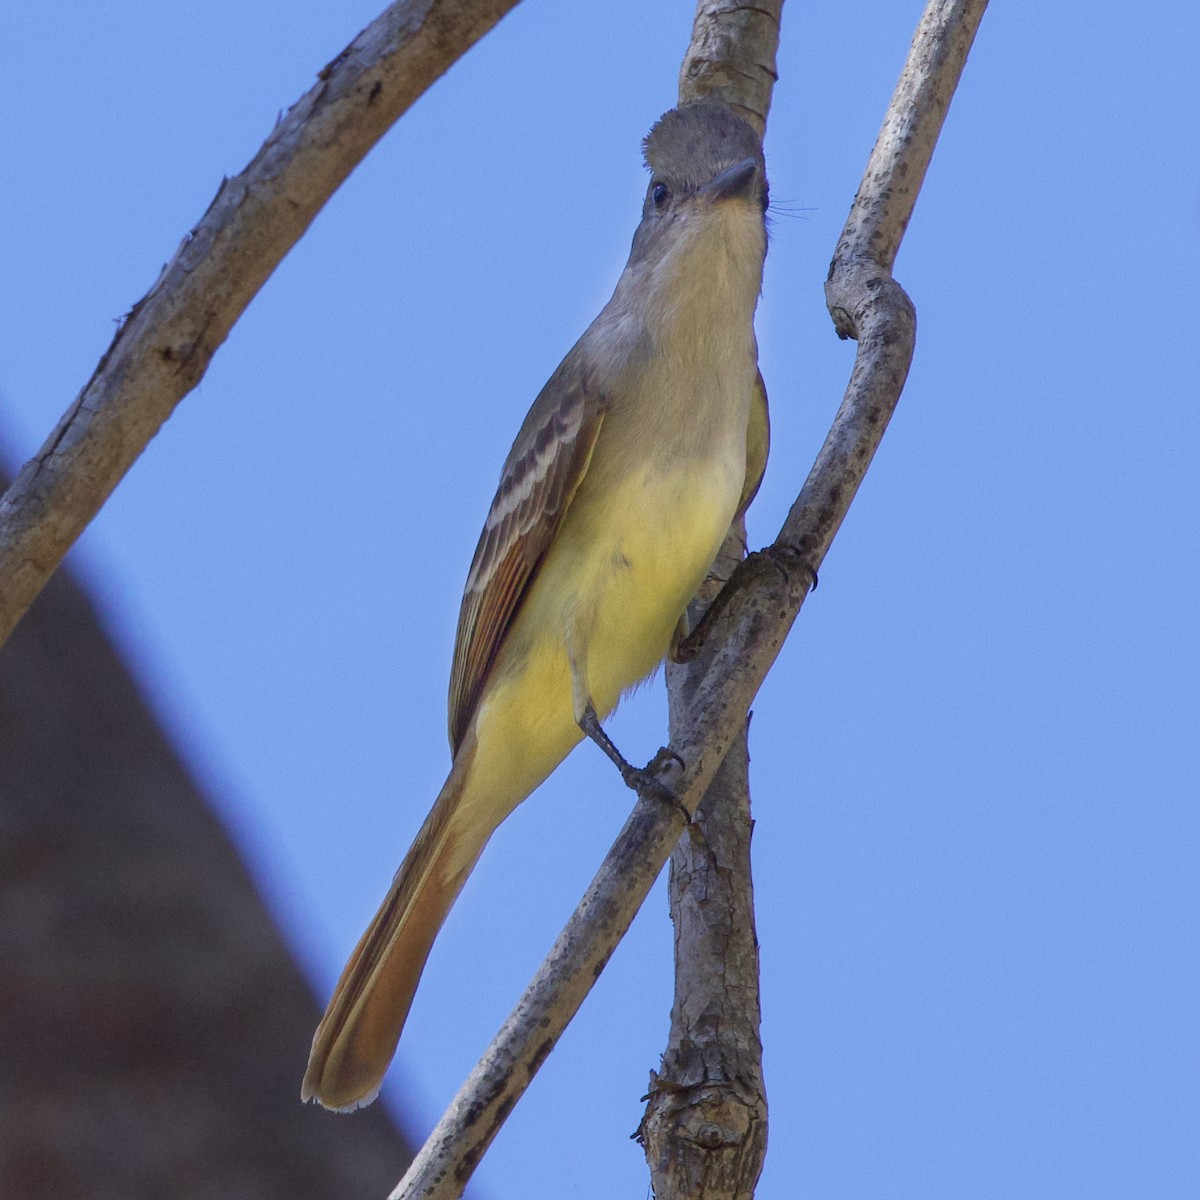 Ash-throated Flycatcher - Dave Prentice